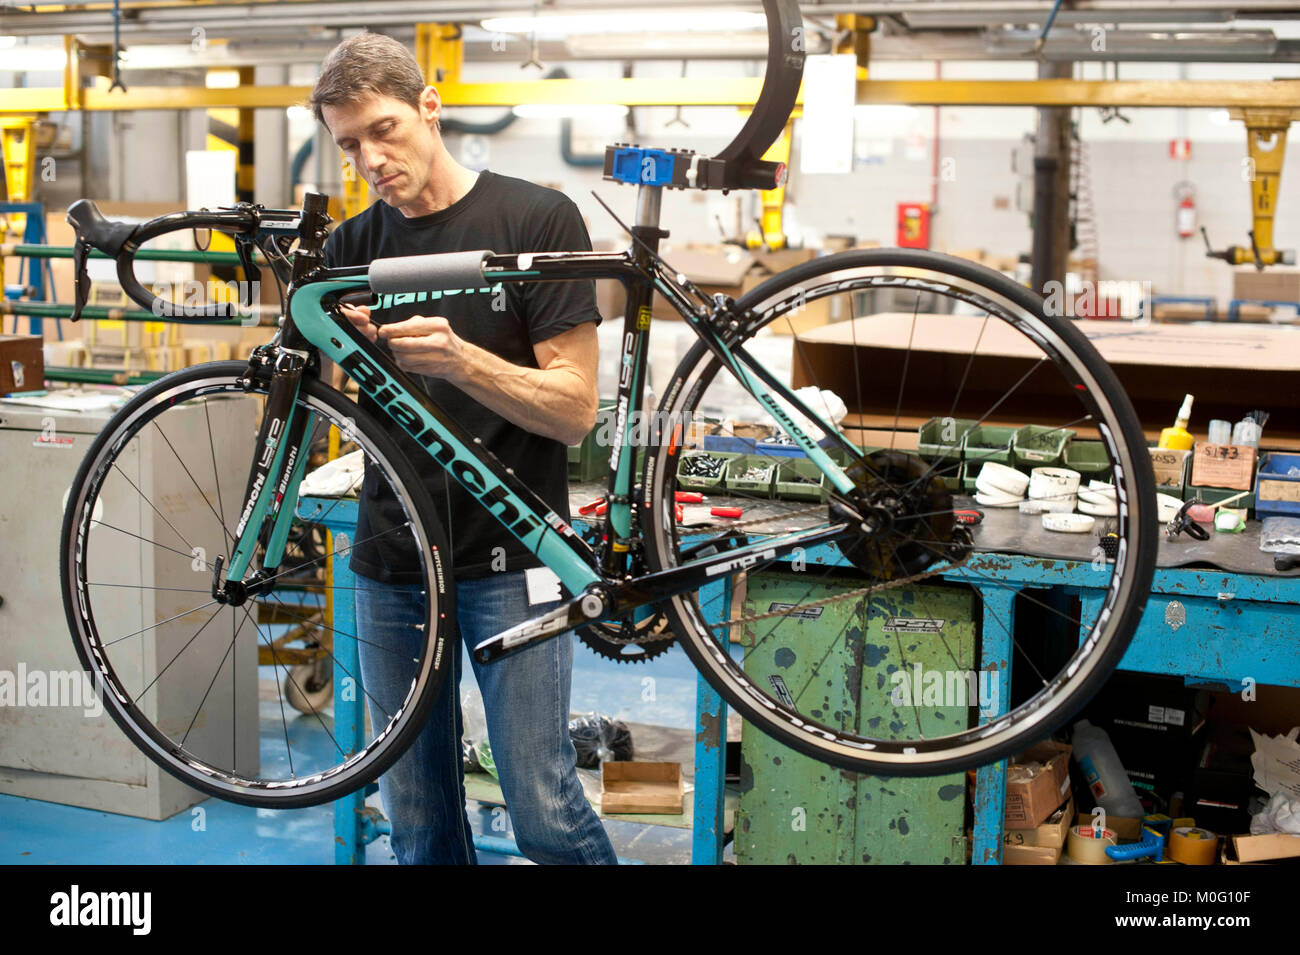 Industry "Biciclette Bianchi" factory - Assembly line of various models of  bicycles - Treviglio - Italy Credit © Marco Vacca/Sintesi/Sintesi/Alamy  Stock Photo - Alamy